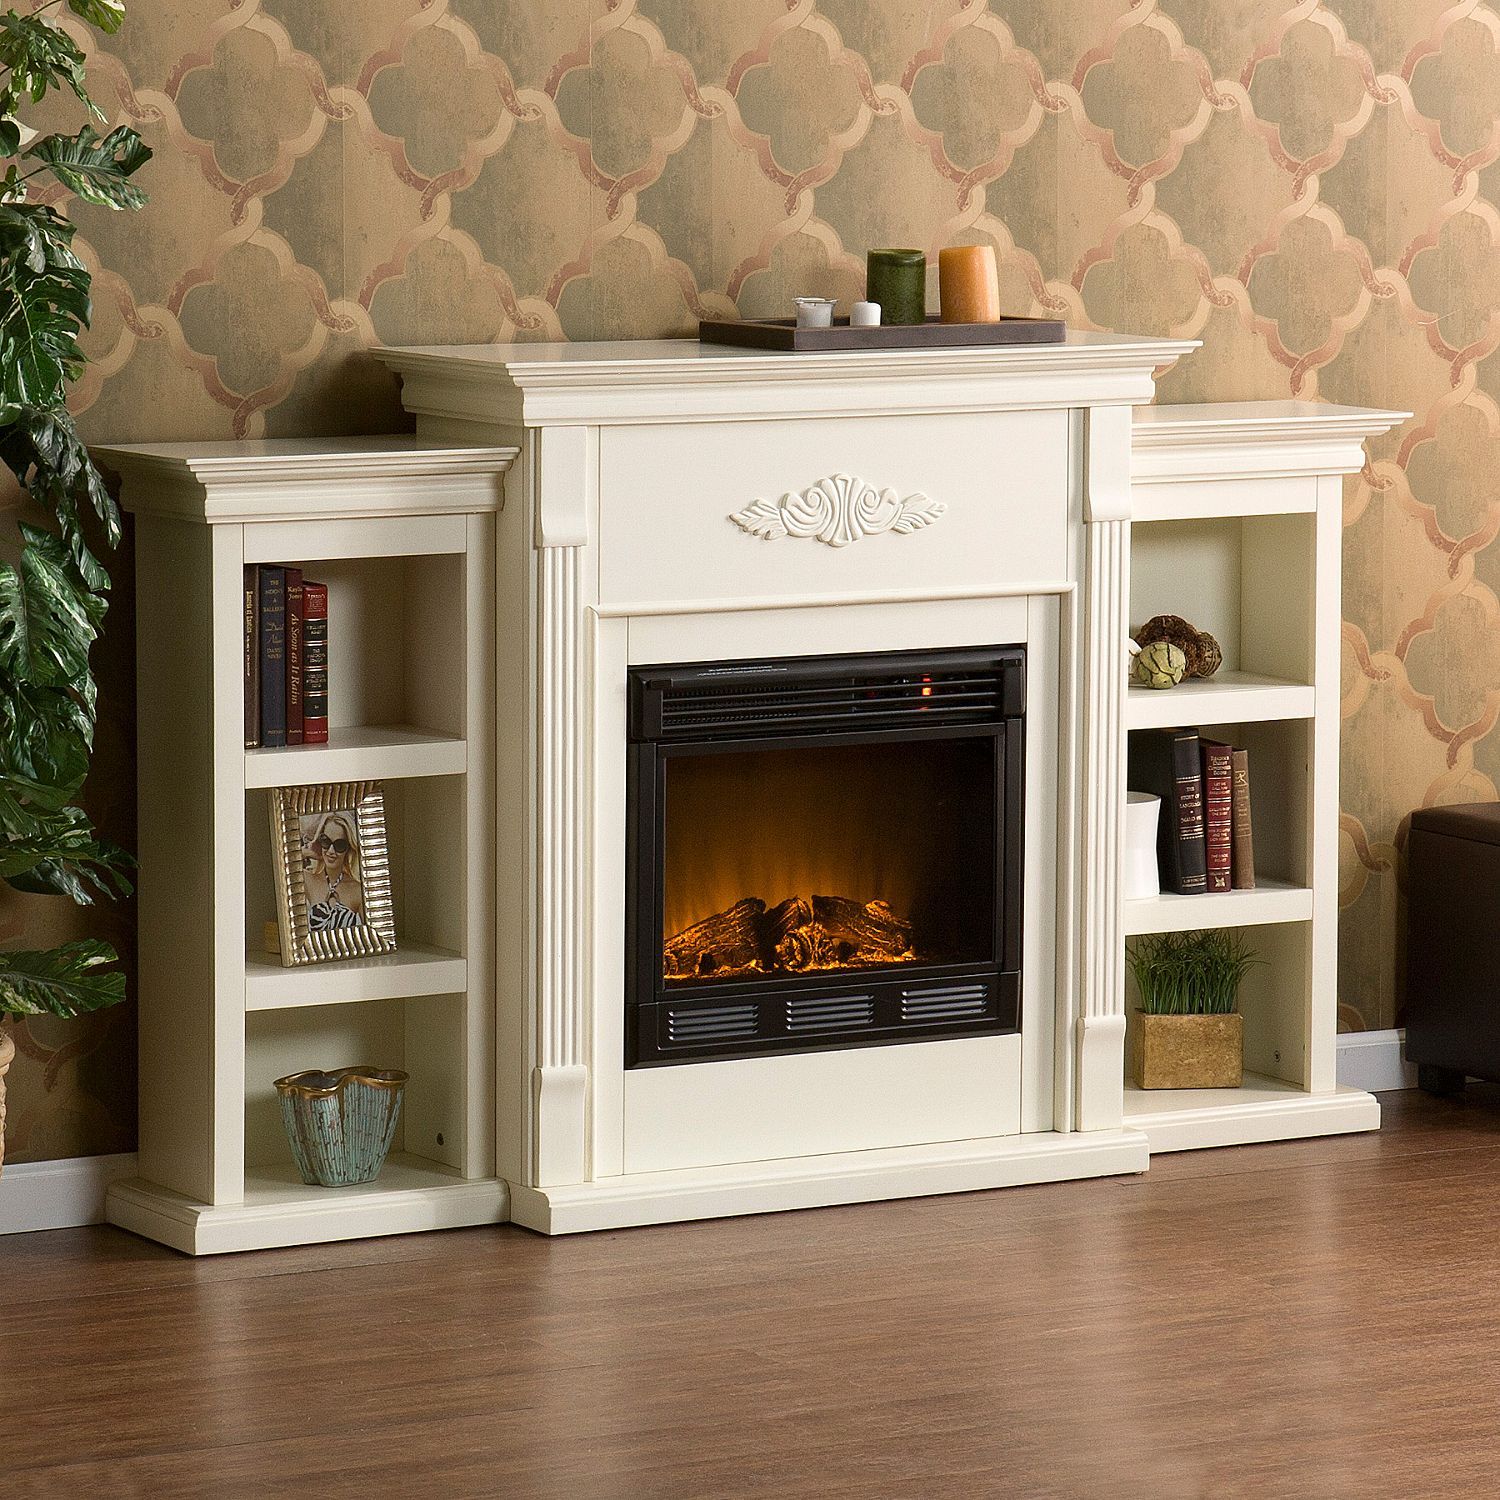 Fake Gas Fireplace New Emerson Electric Fireplace Ivory Sam S Club